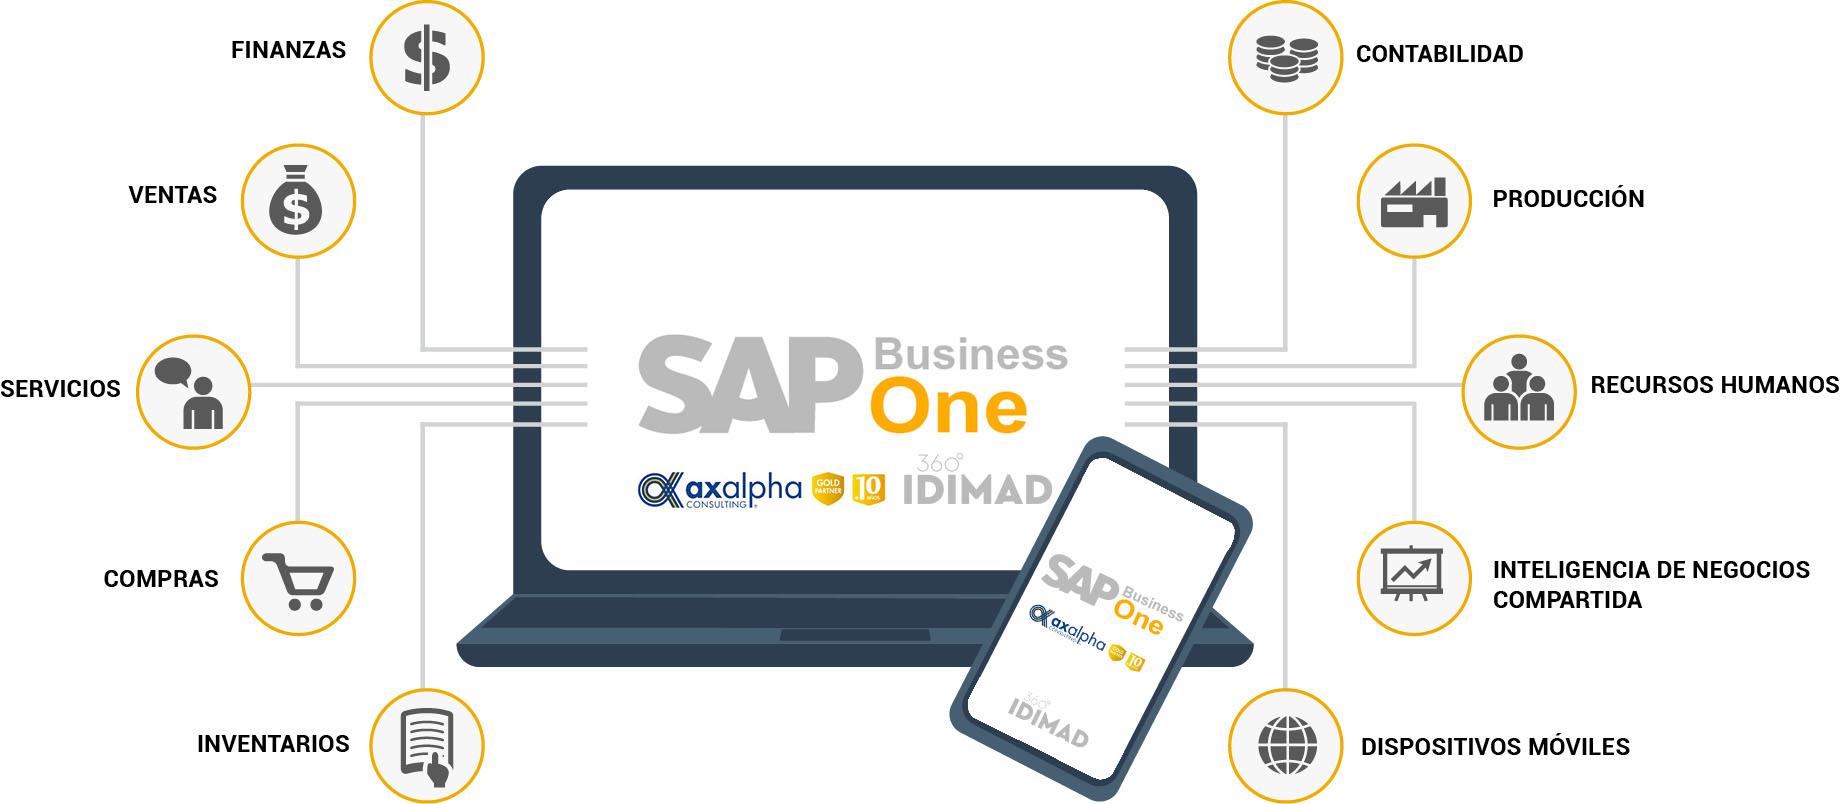 SAP Business One - ERP para PYMEs - IDIMAD 360